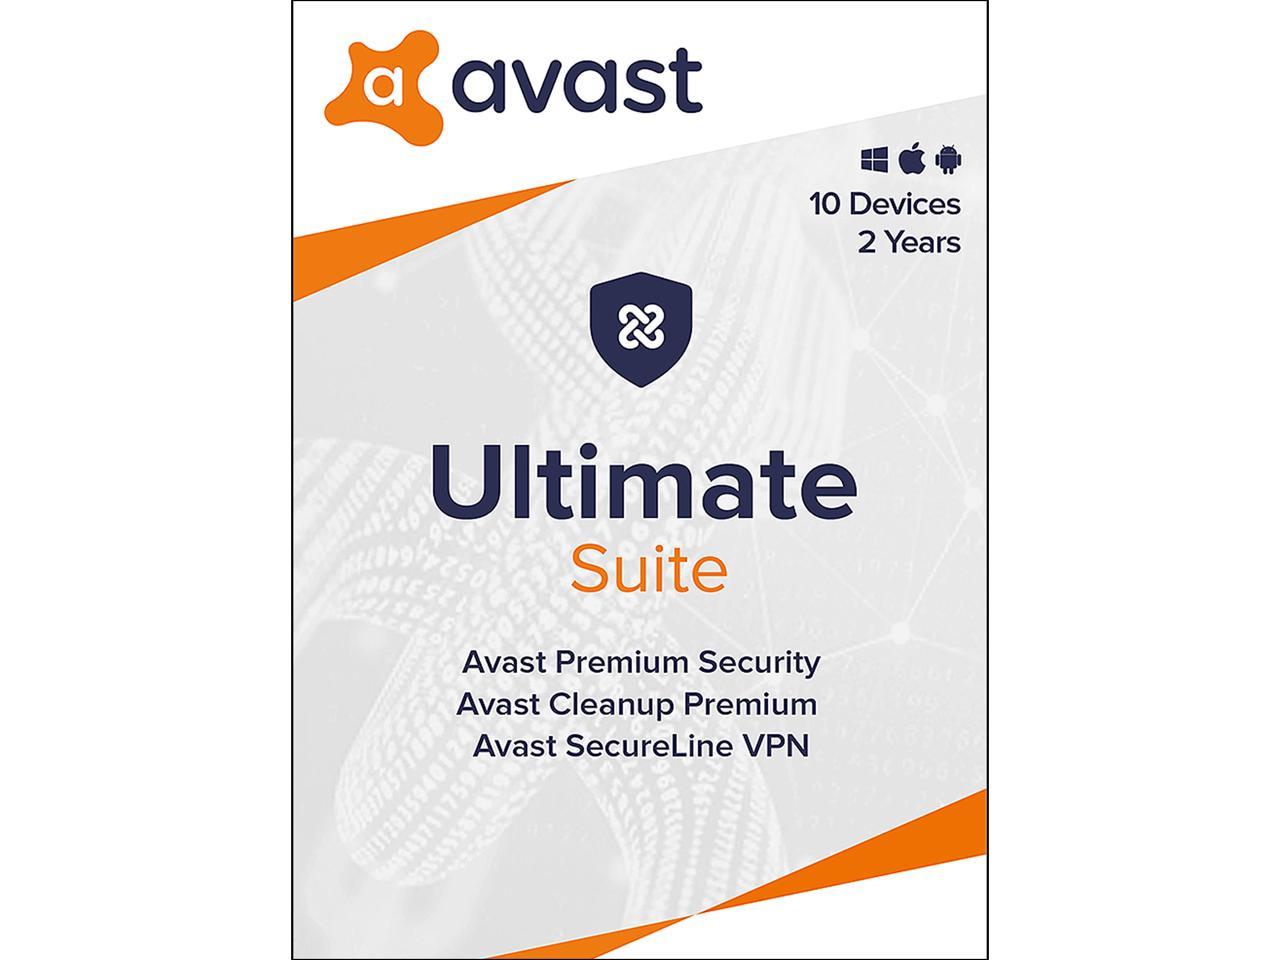 Avast Ultimate Suite 2021 [Security, Cleanup & VPN] 1 Device 1 year $6.99 10 Devices 2 Years $26.99 with code